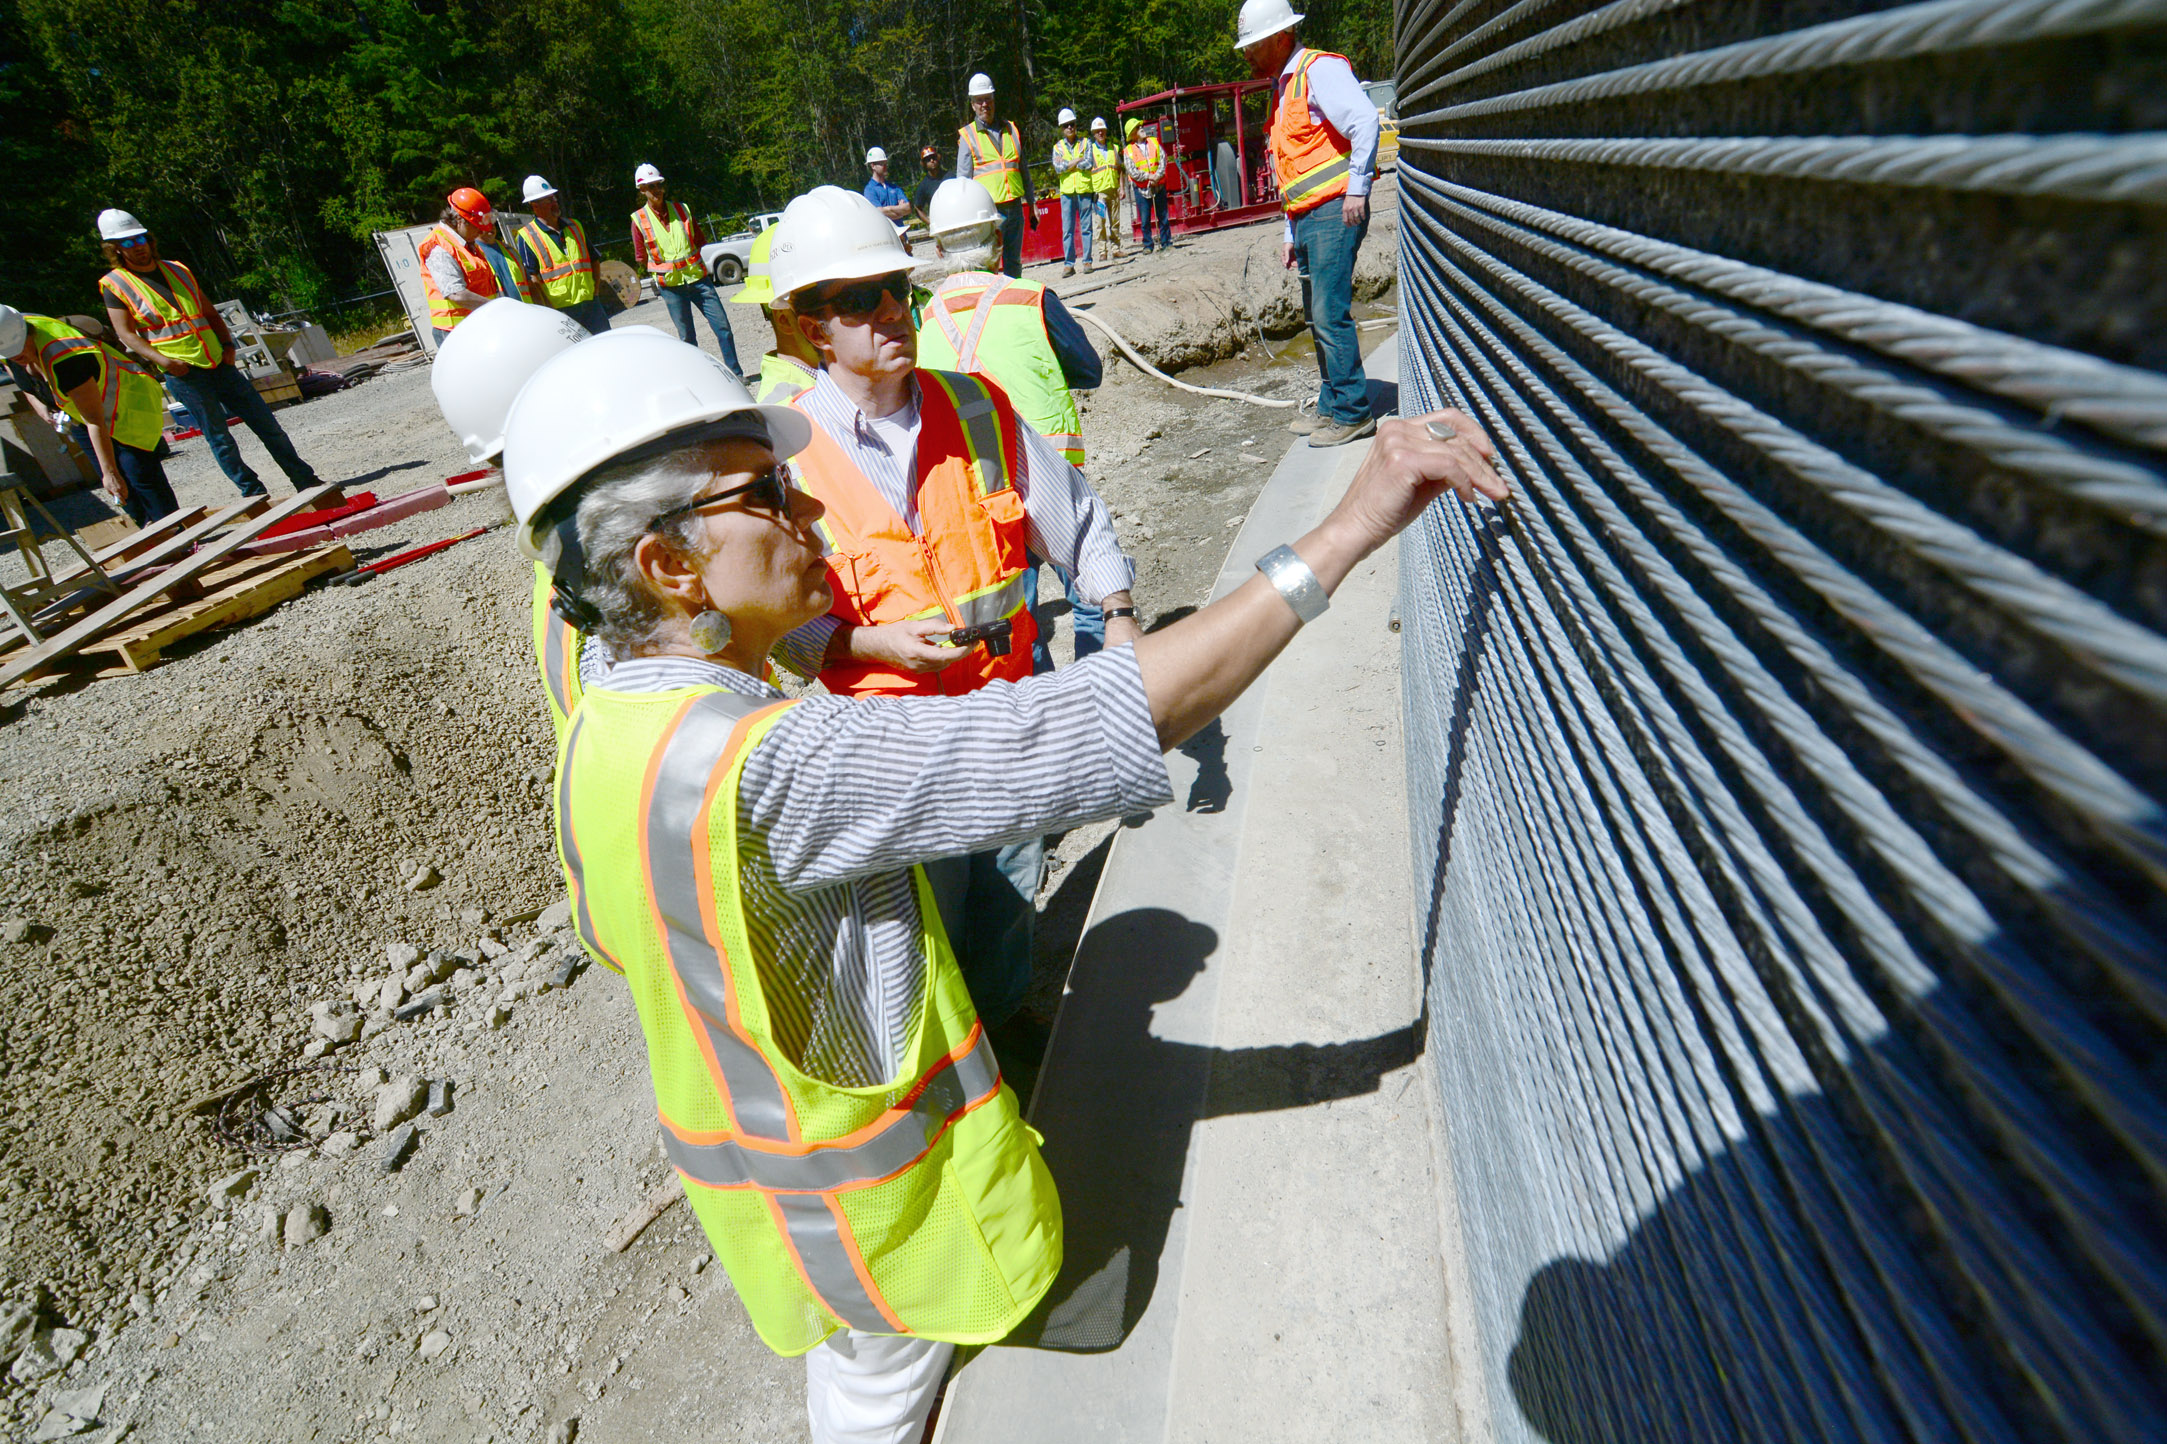 Port Townsend city officials take a close look at the city's 5 million-gallon reservoir project Wednesday. (Jesse Major/Peninsula Daily News)